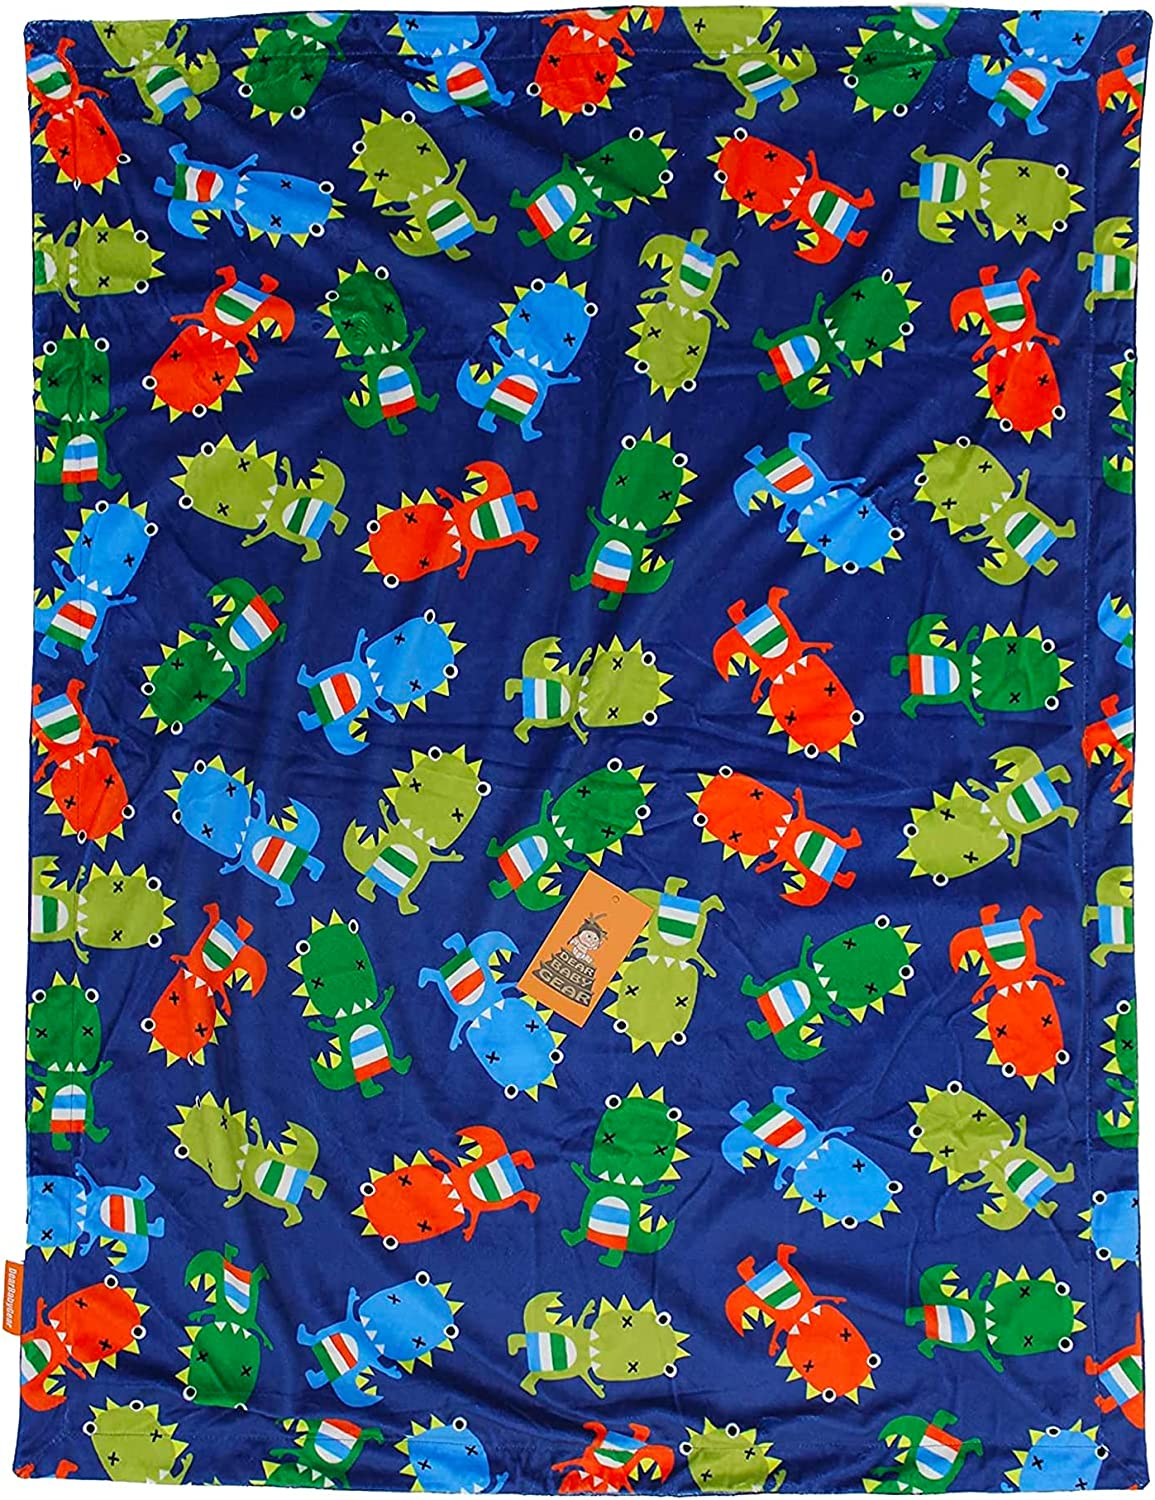 Dear Baby Gear Deluxe Double Layer Soft Minky Baby Blanket – Dinosaur Boo on Blue / Mutlicolored Dino, Exclusive Print, 40 x 30 Inches